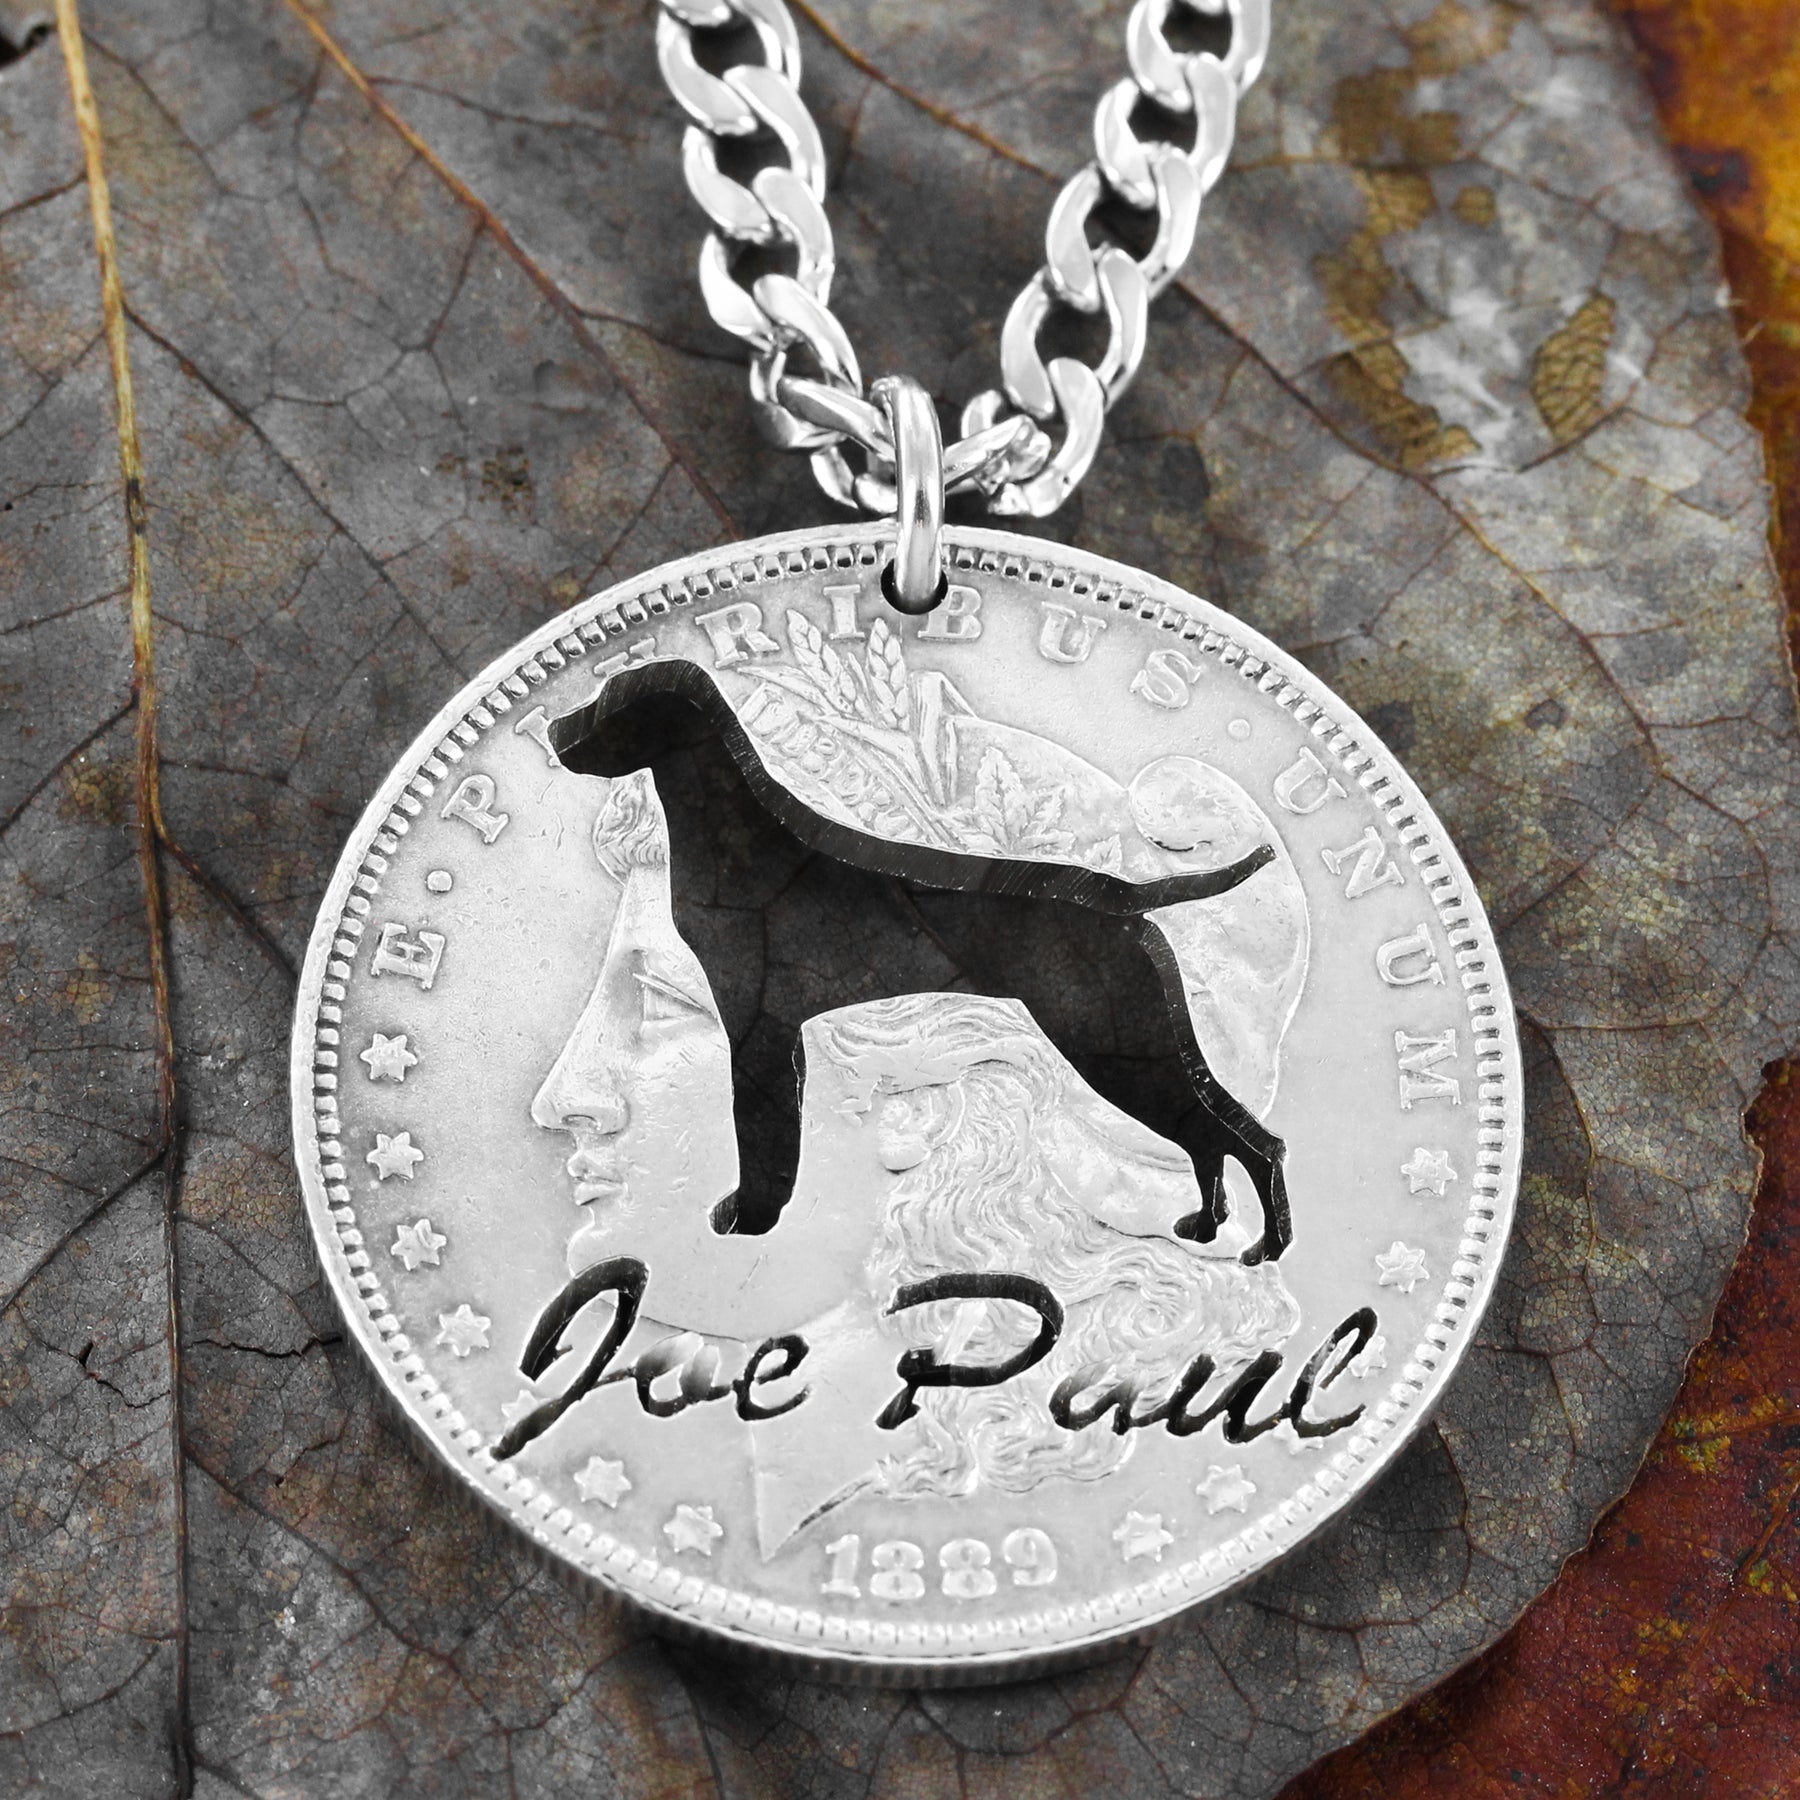 Amazon.com: Coonhound Dog Necklace - Blue Tick Hunting Hound Dog Breed  Jewelry - Gift for Dog Lover : Handmade Products